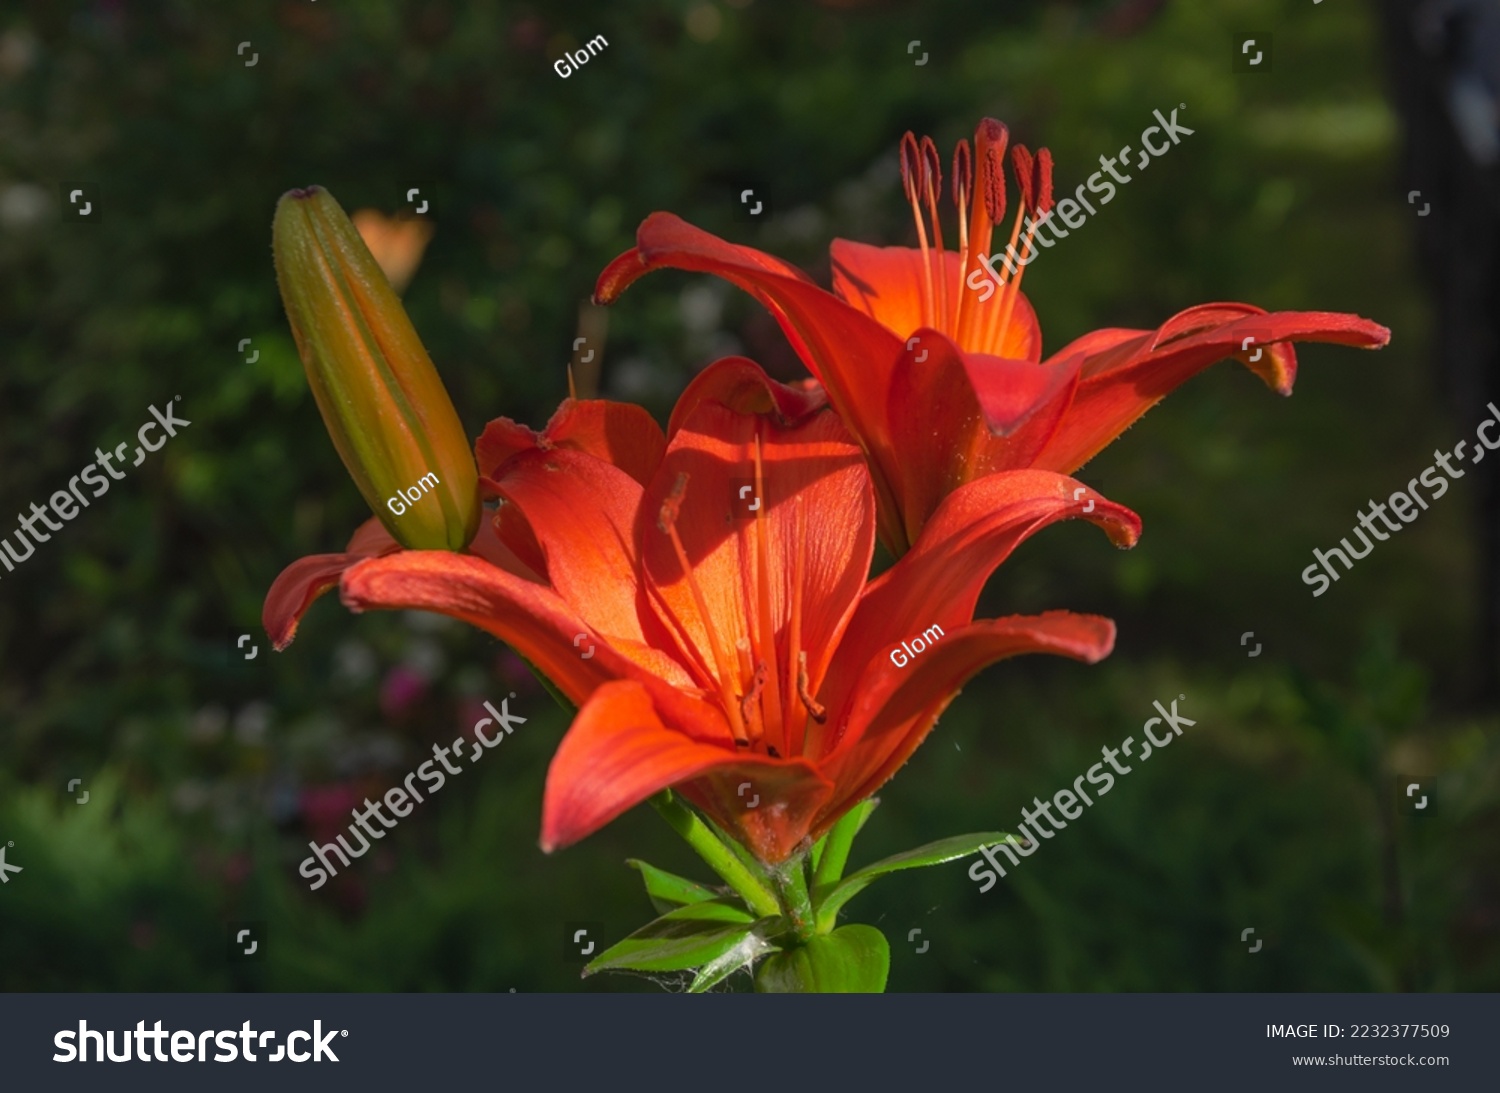 the lily plant bloomed beautifully, brightly. red lily flowers. High quality photo #2232377509